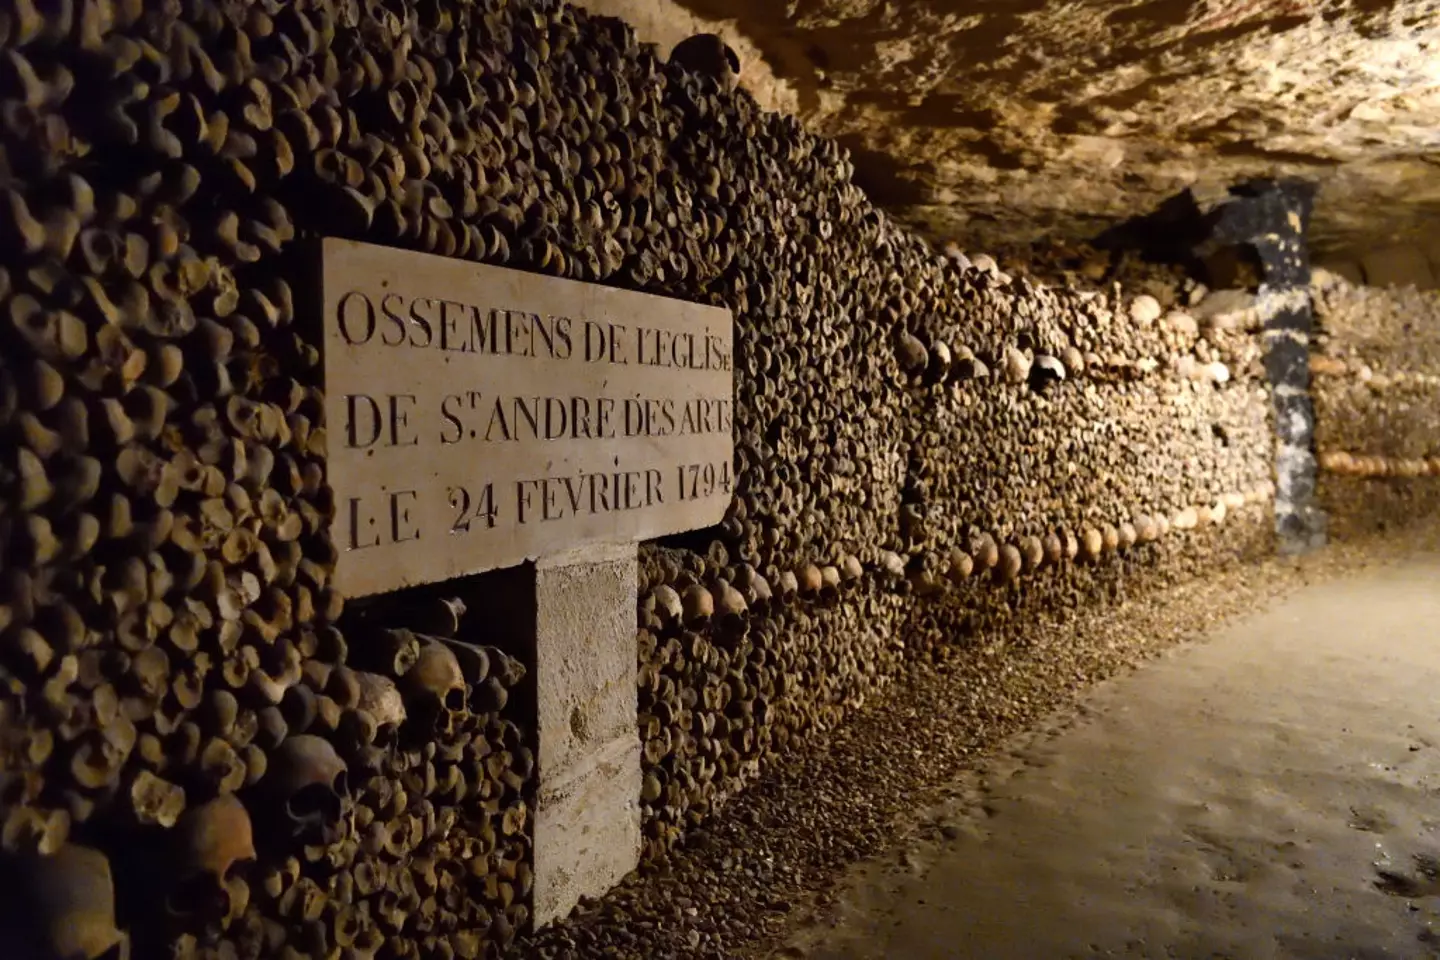 The catacombs originated as a way to bury the dead.